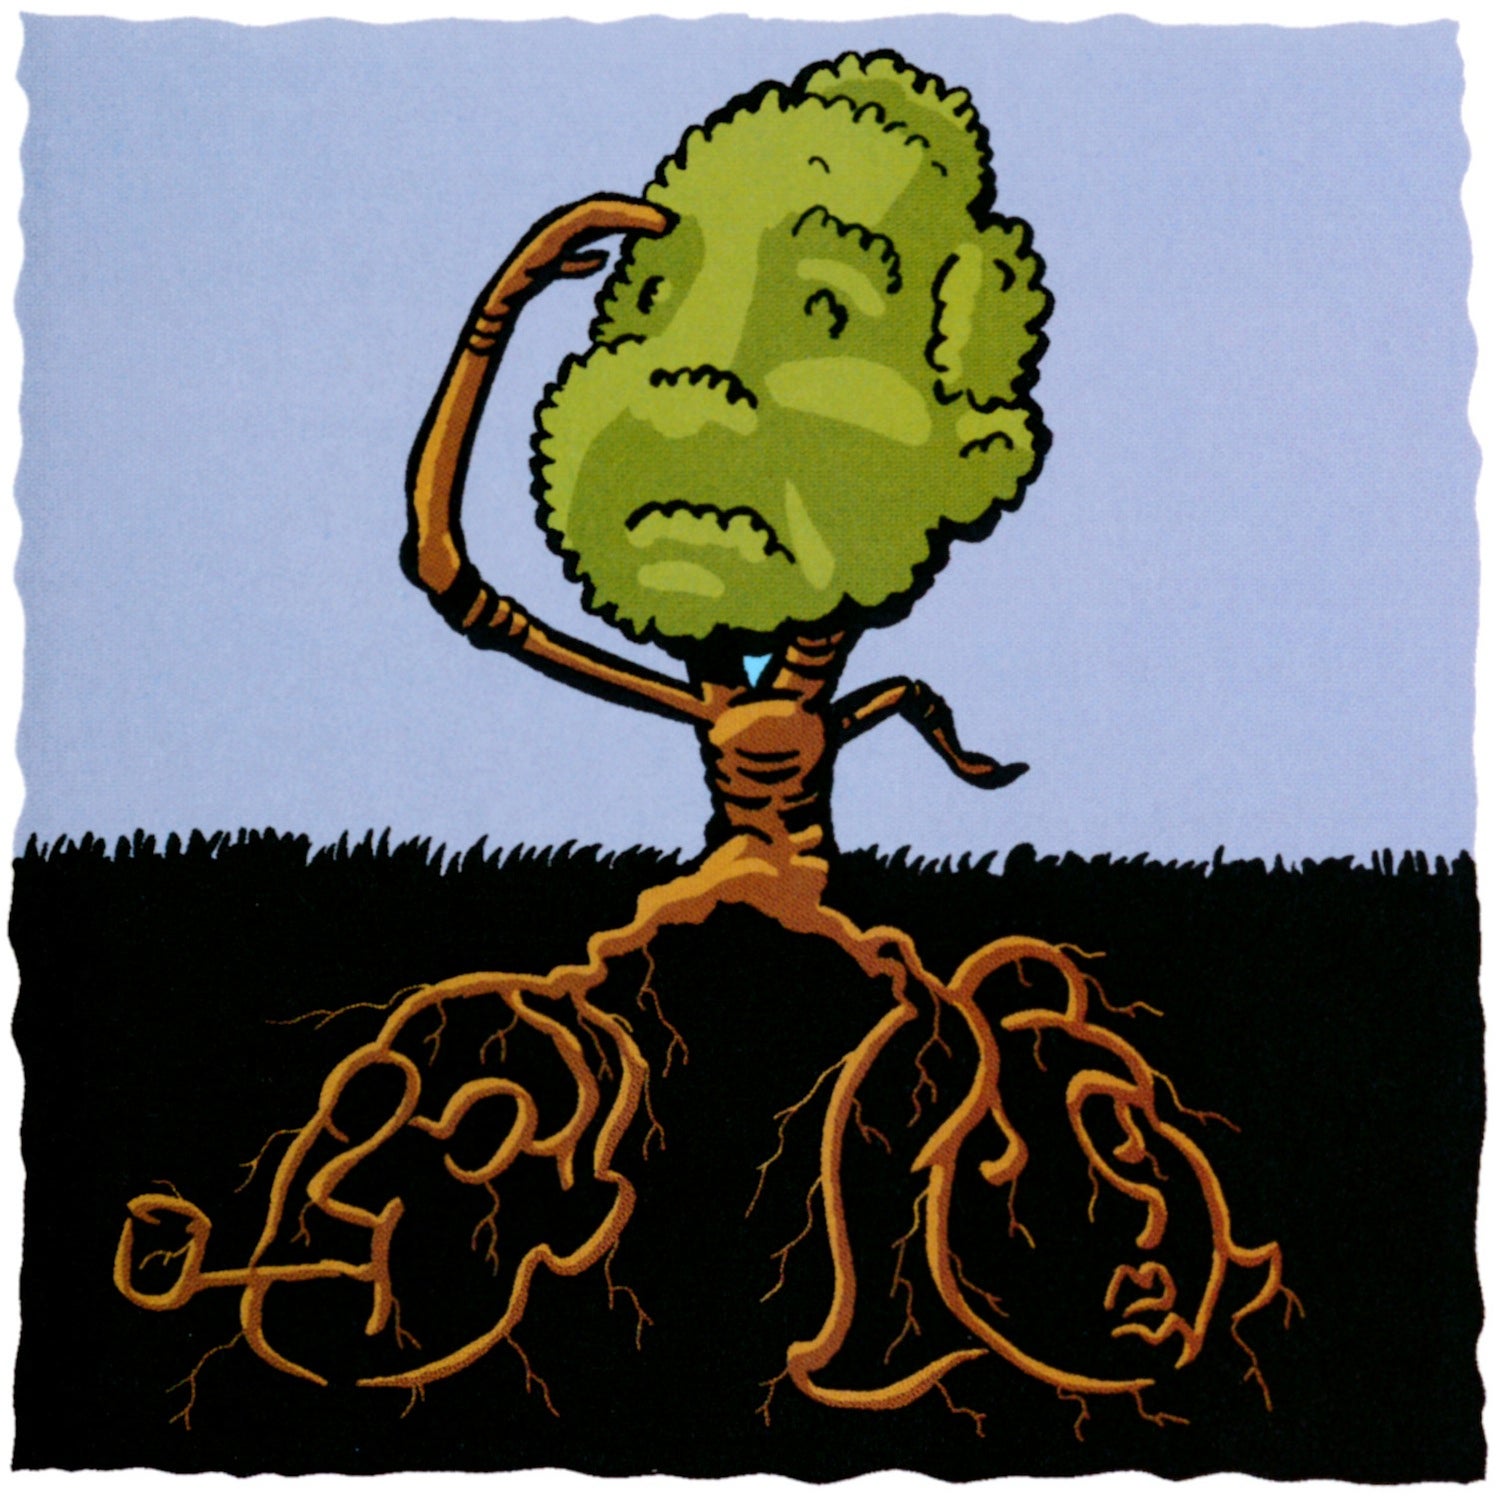 Illustration of tree with roots forming into the shape of a man and woman's face